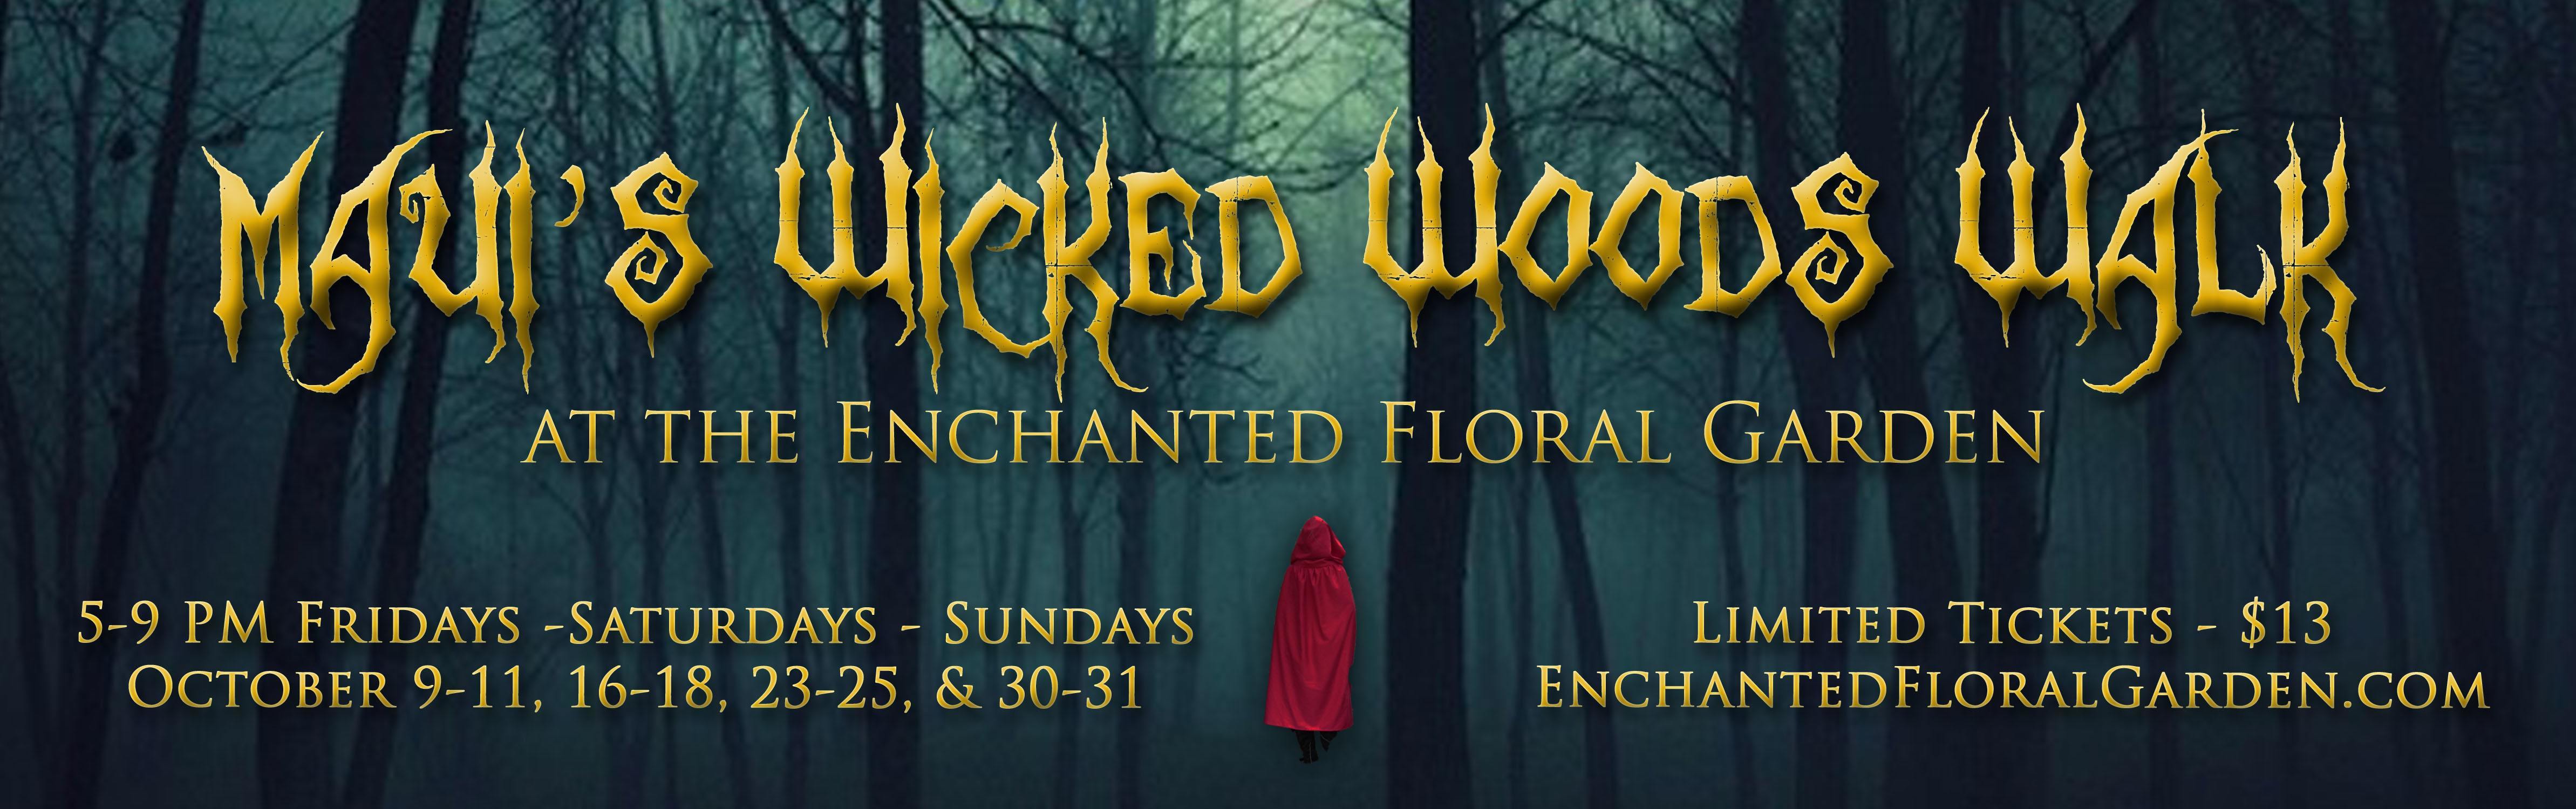 Wicked-Woods-banner_edited-2